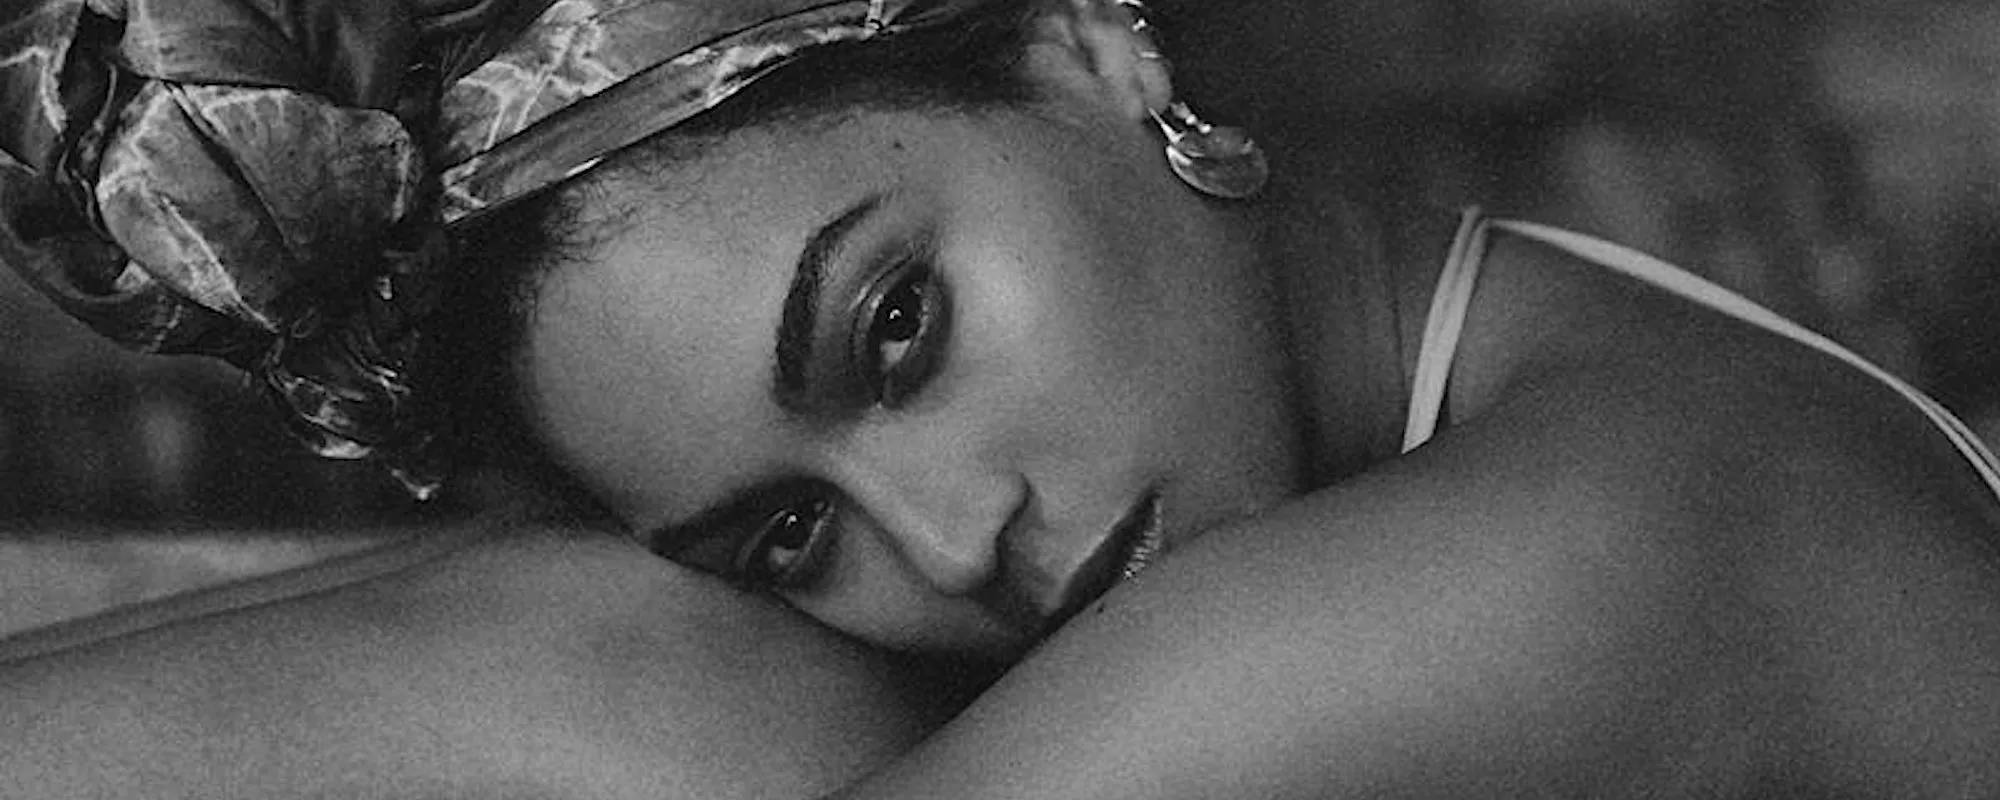 Beyonce is Dropping a New Song at Midnight, “Break My Soul”